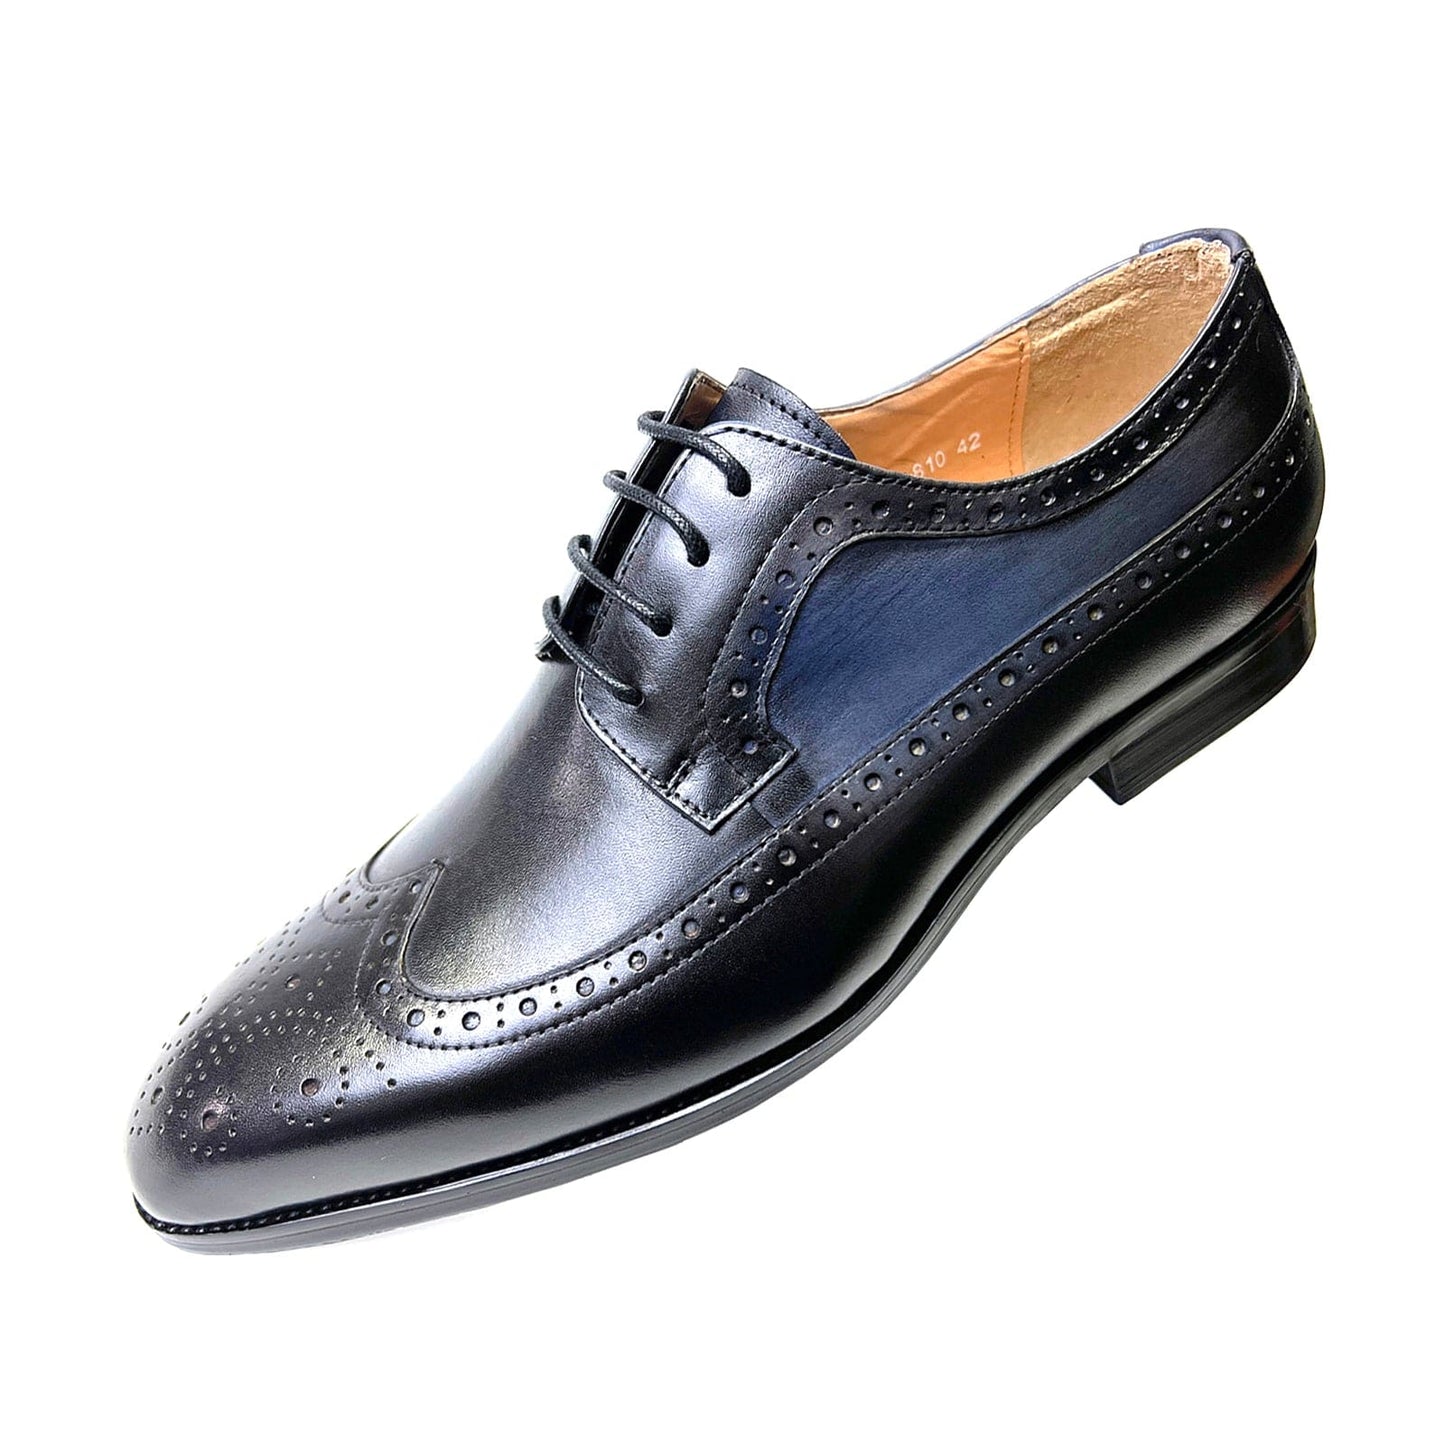 LUXURY ITALIAN OXFORD MEN DRESS SHOES FASHION HAND-MADE PRINTS LACE UP BLACK WEDDING OFFICE SHOES FORMAL MEN SHOES LEATHER